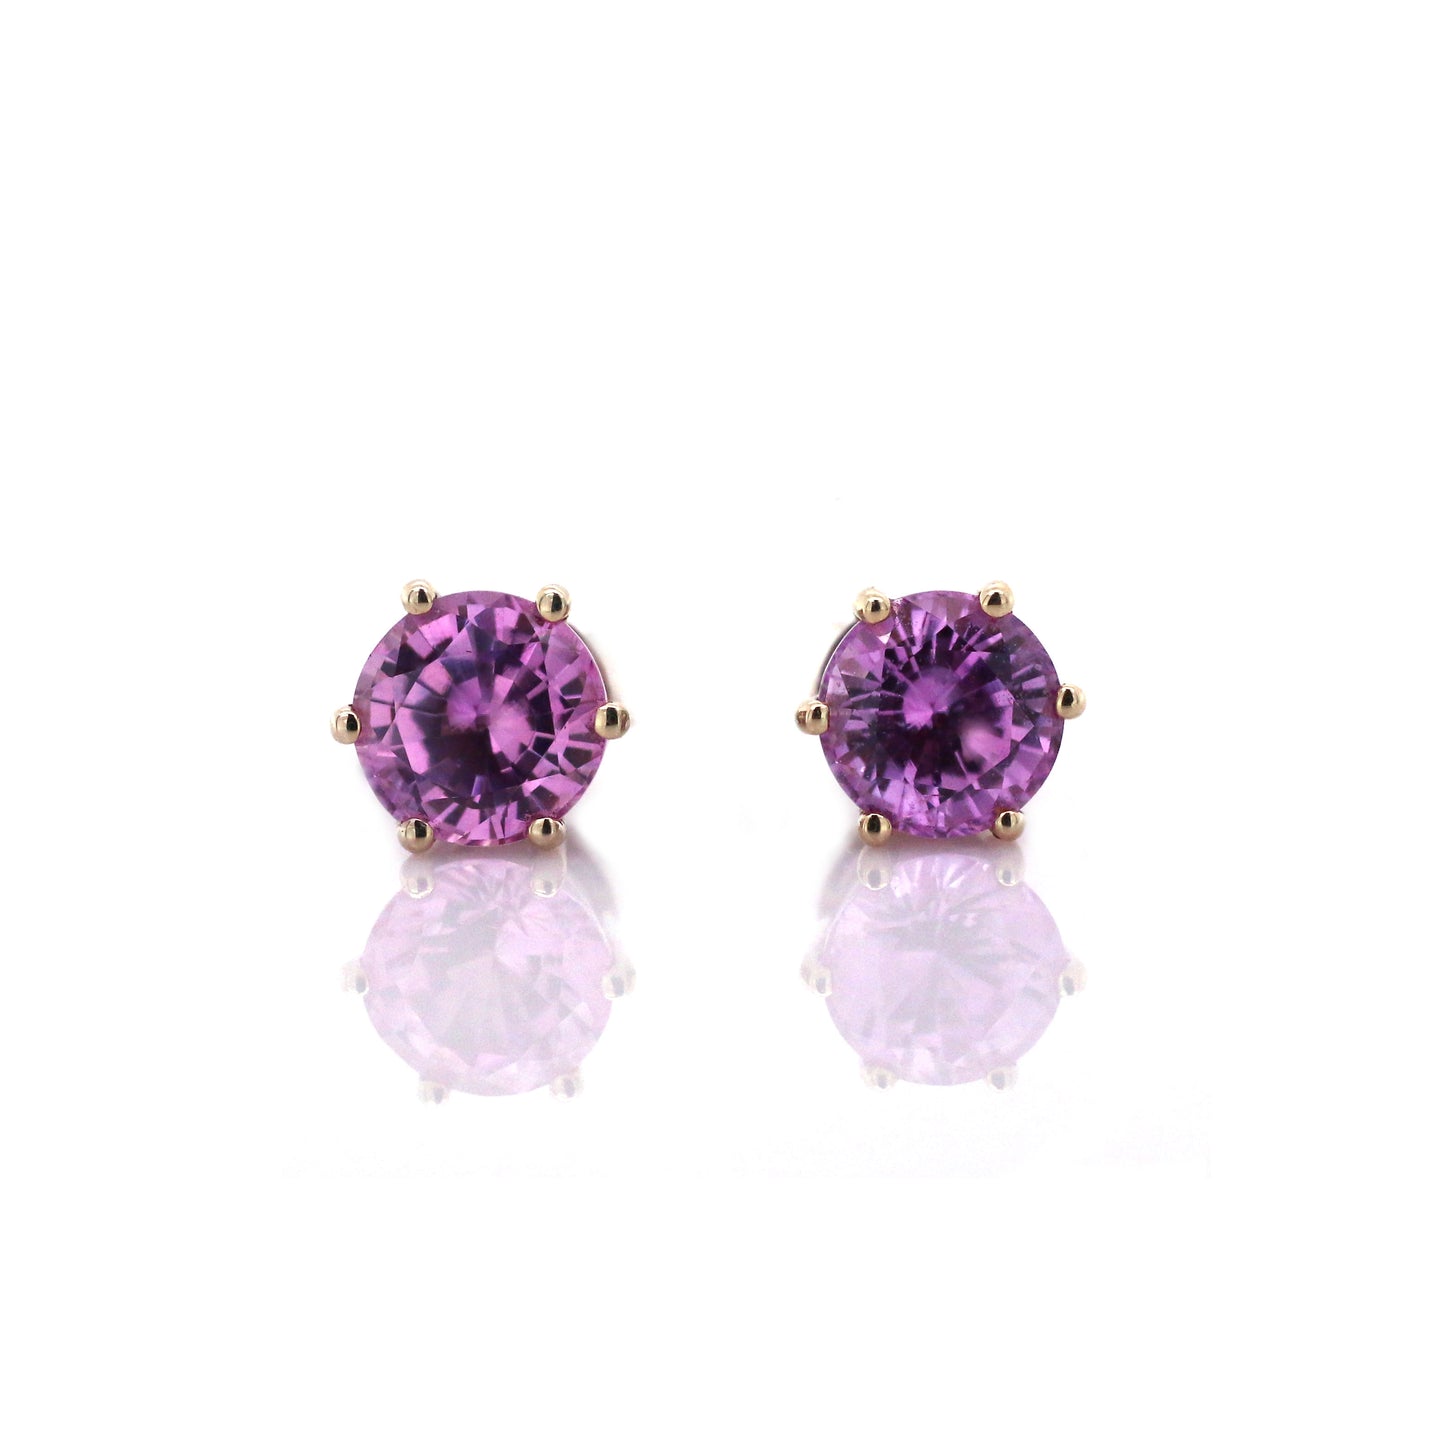 This Sparkling created Pink Sapphire Earring is Simple but Stunning